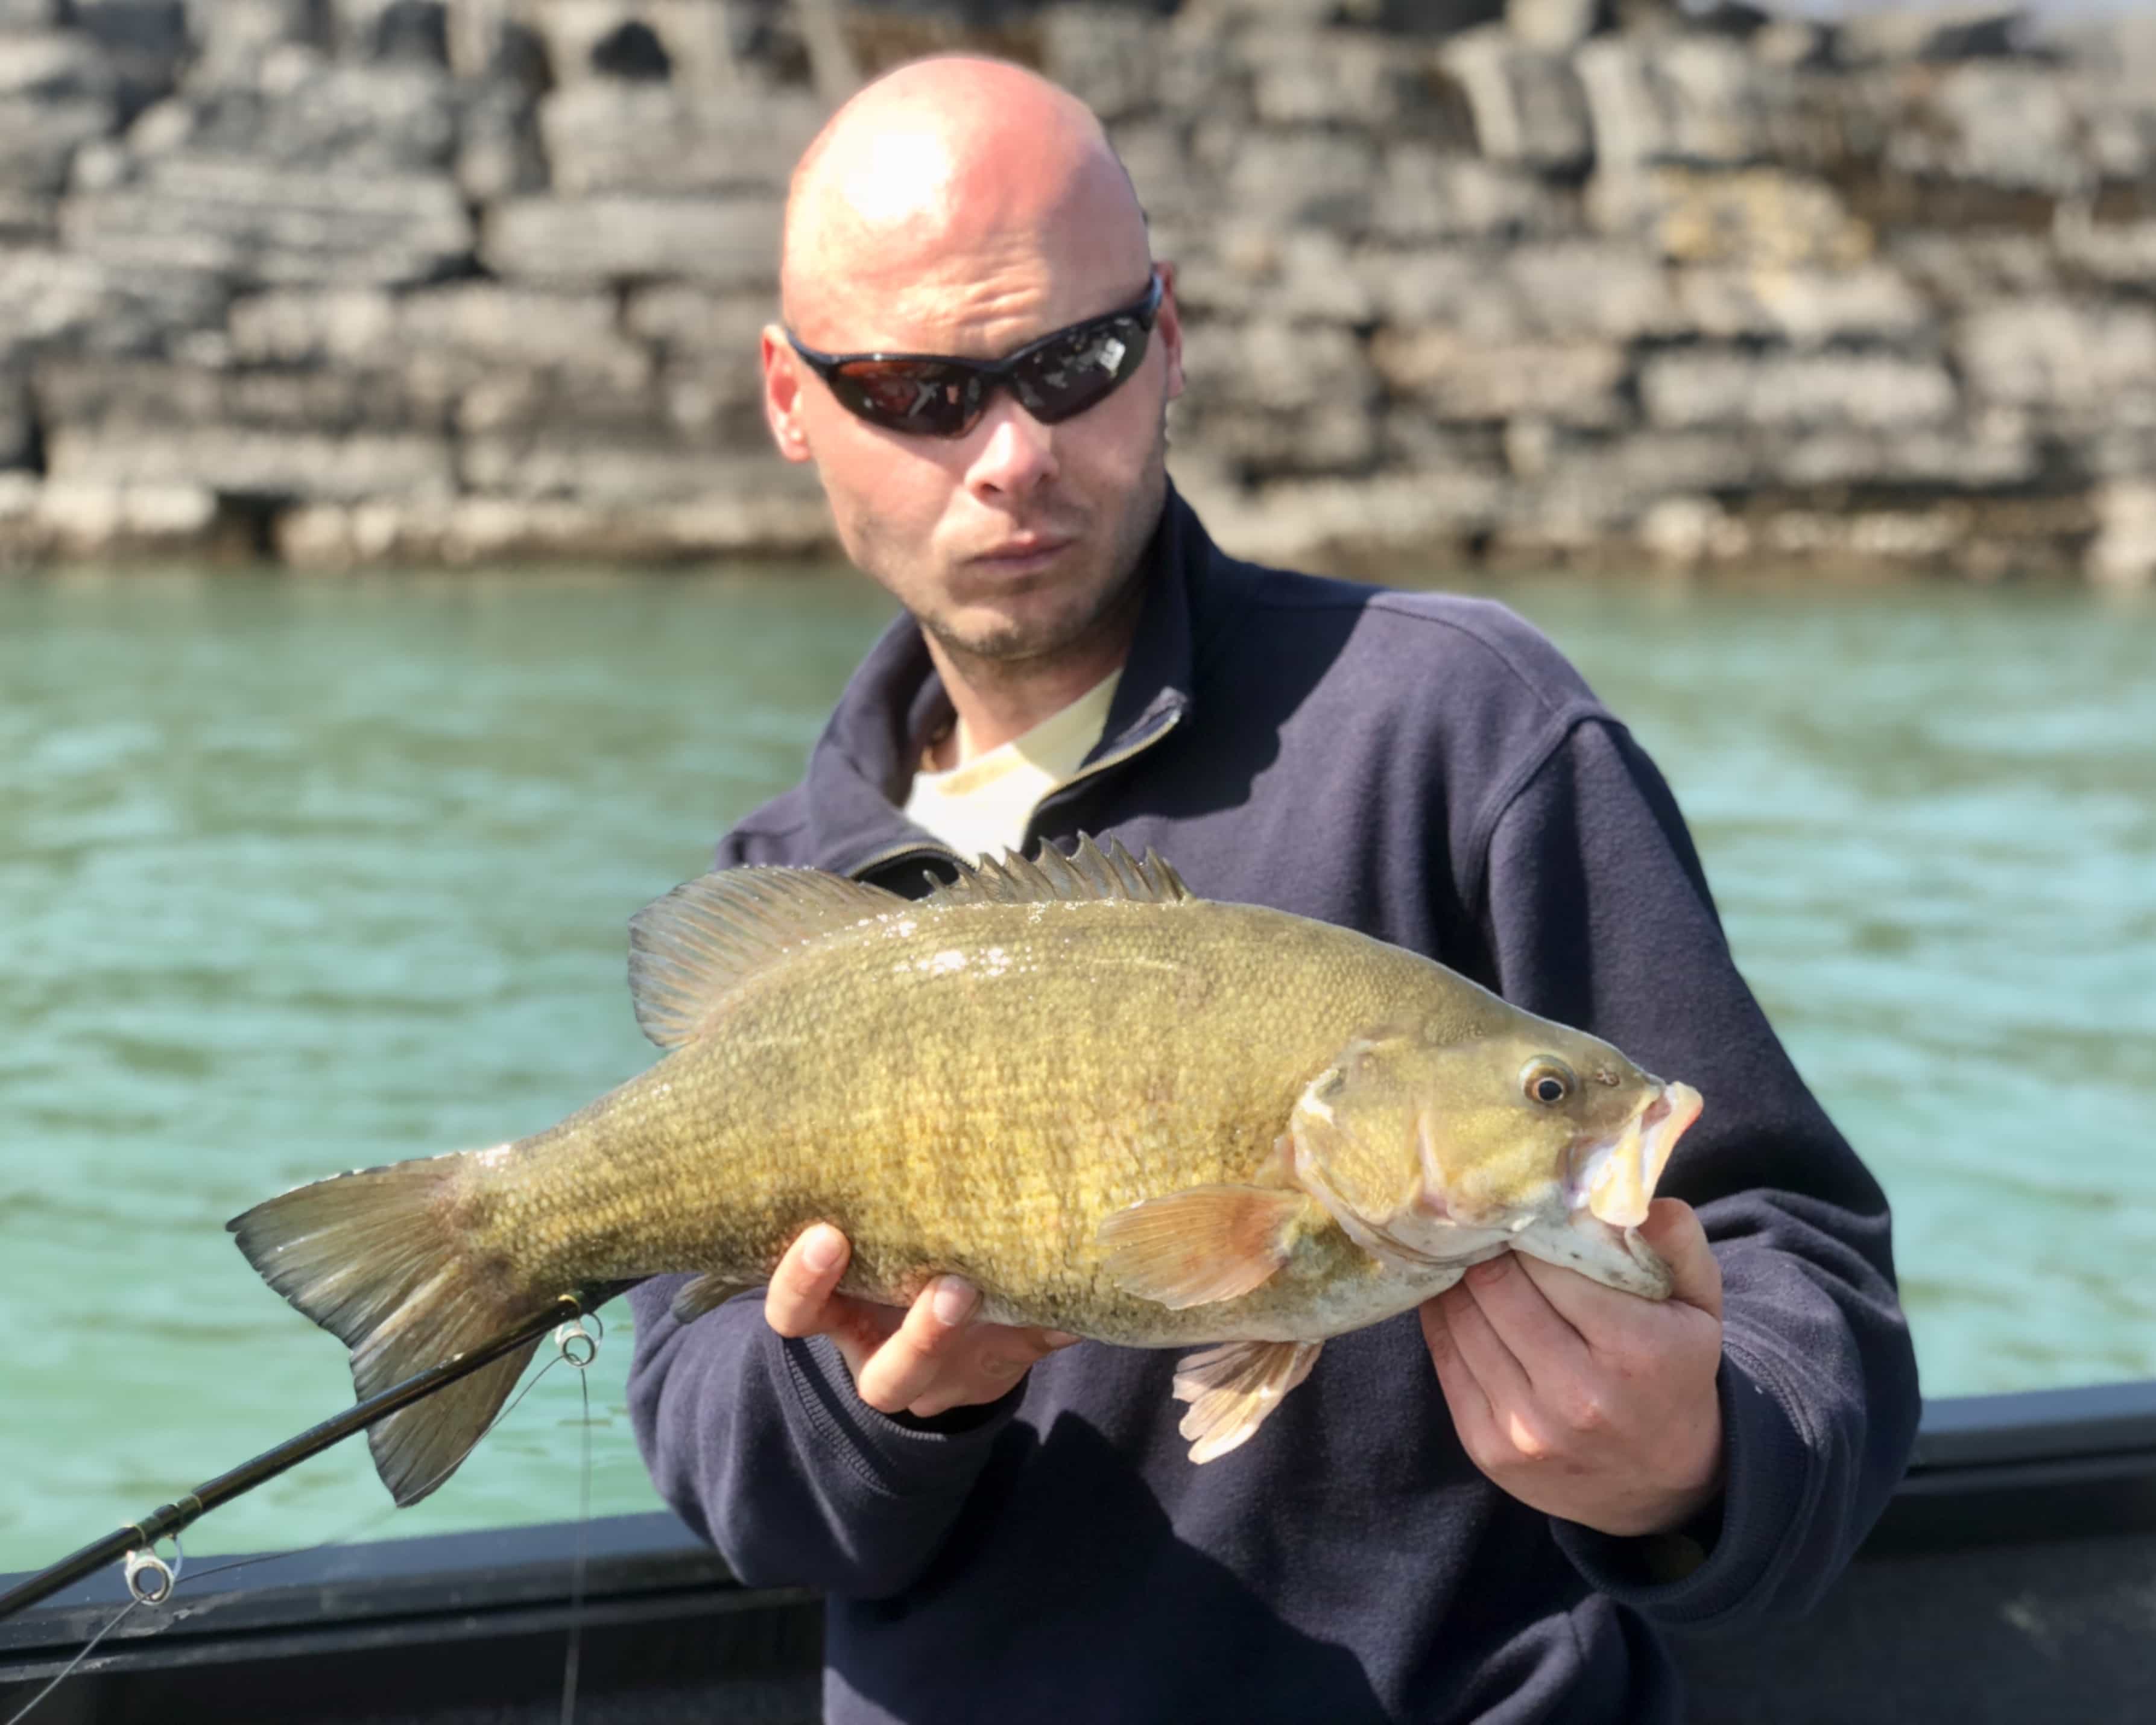 15E98303 2614 4338 8CBA 8D5FD1761B3F - Attempting a New Smallmouth Bass World Record – Fly Tackle